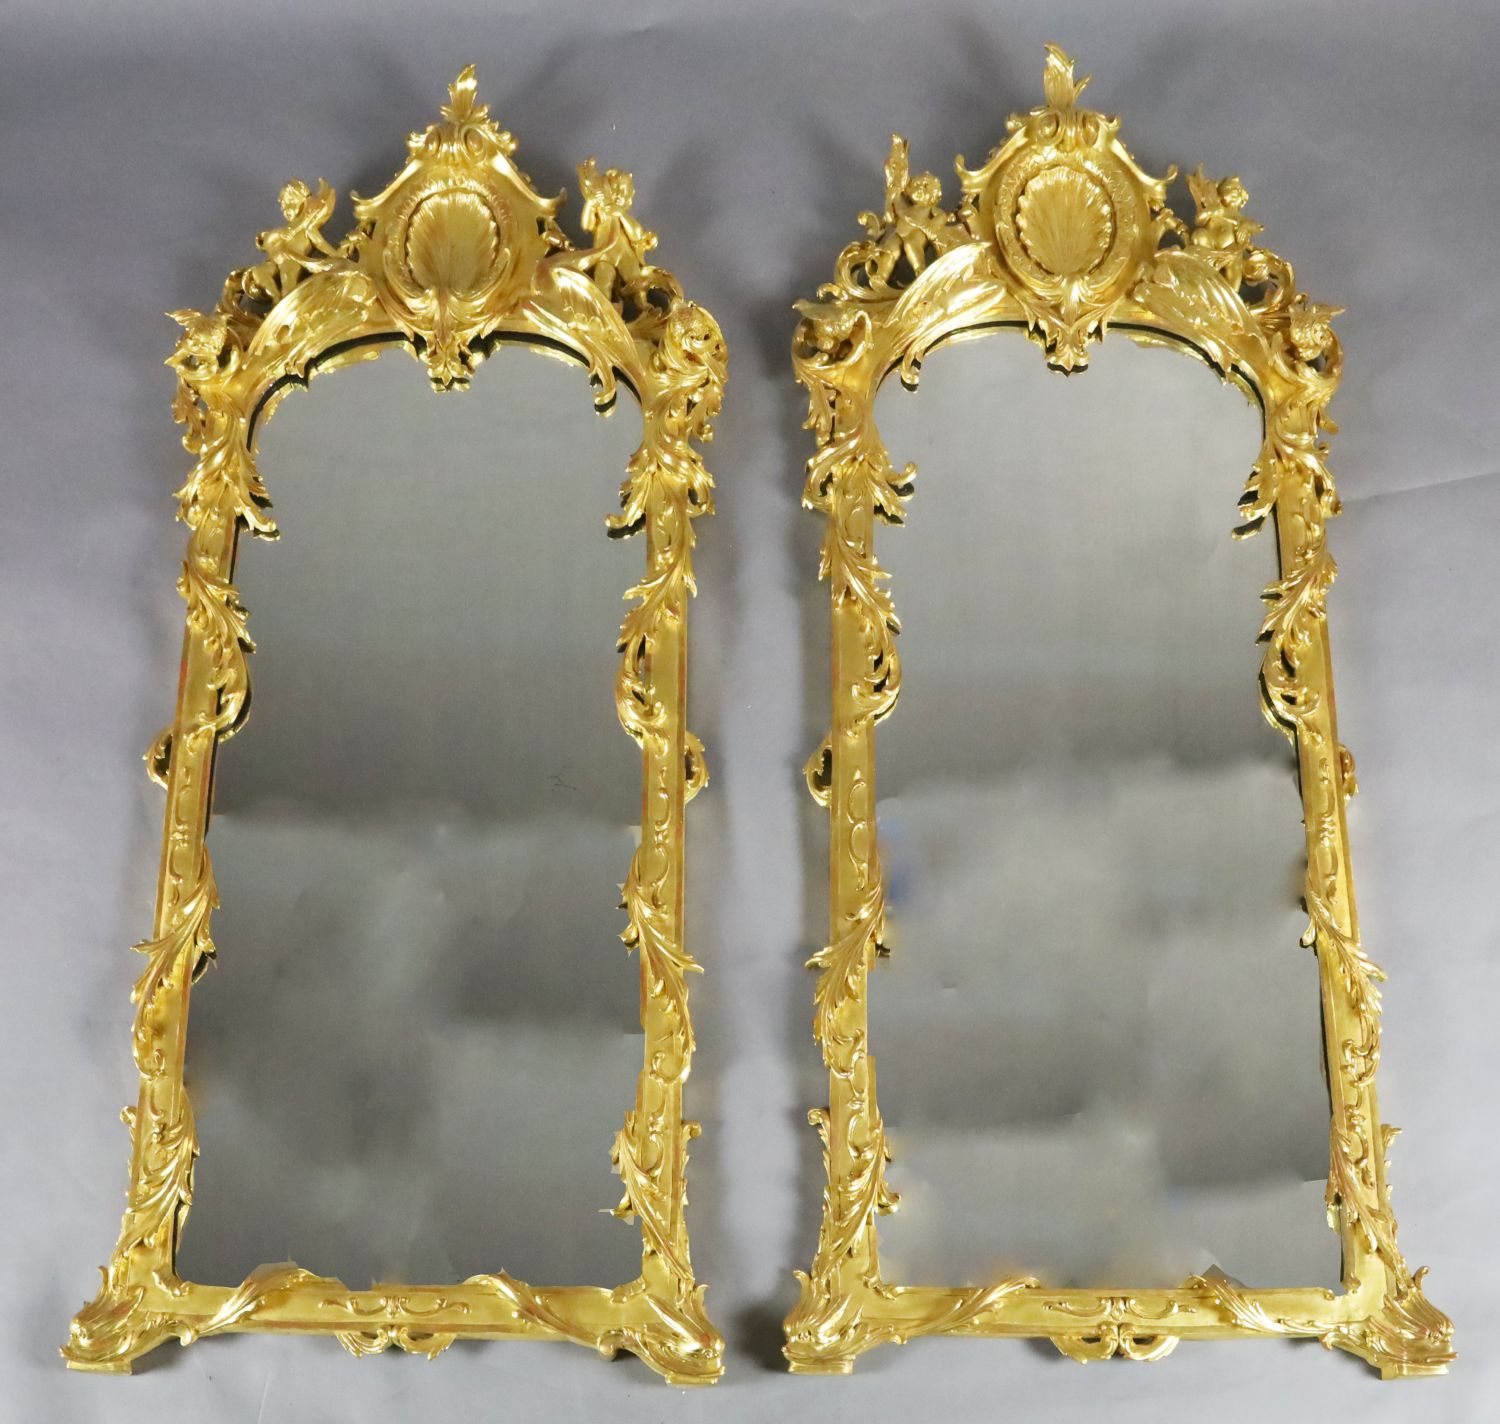 A pair of 19th century French carved giltwood wall mirrors, with scallop and scroll crests flanked